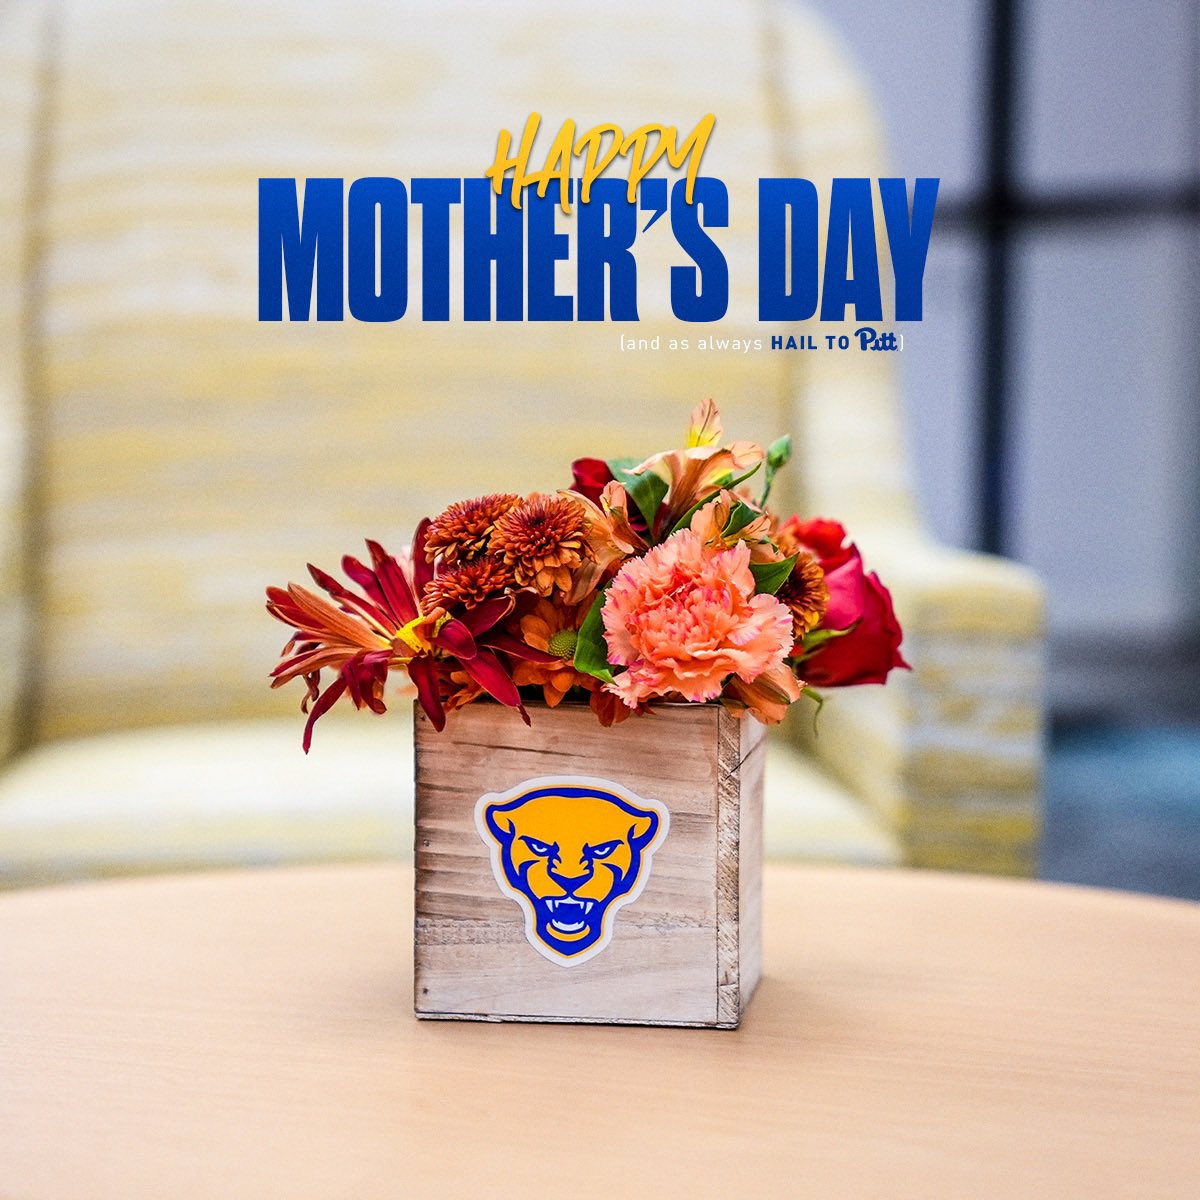 Happy Mother’s Day to all the Panther moms out there! 💙💛